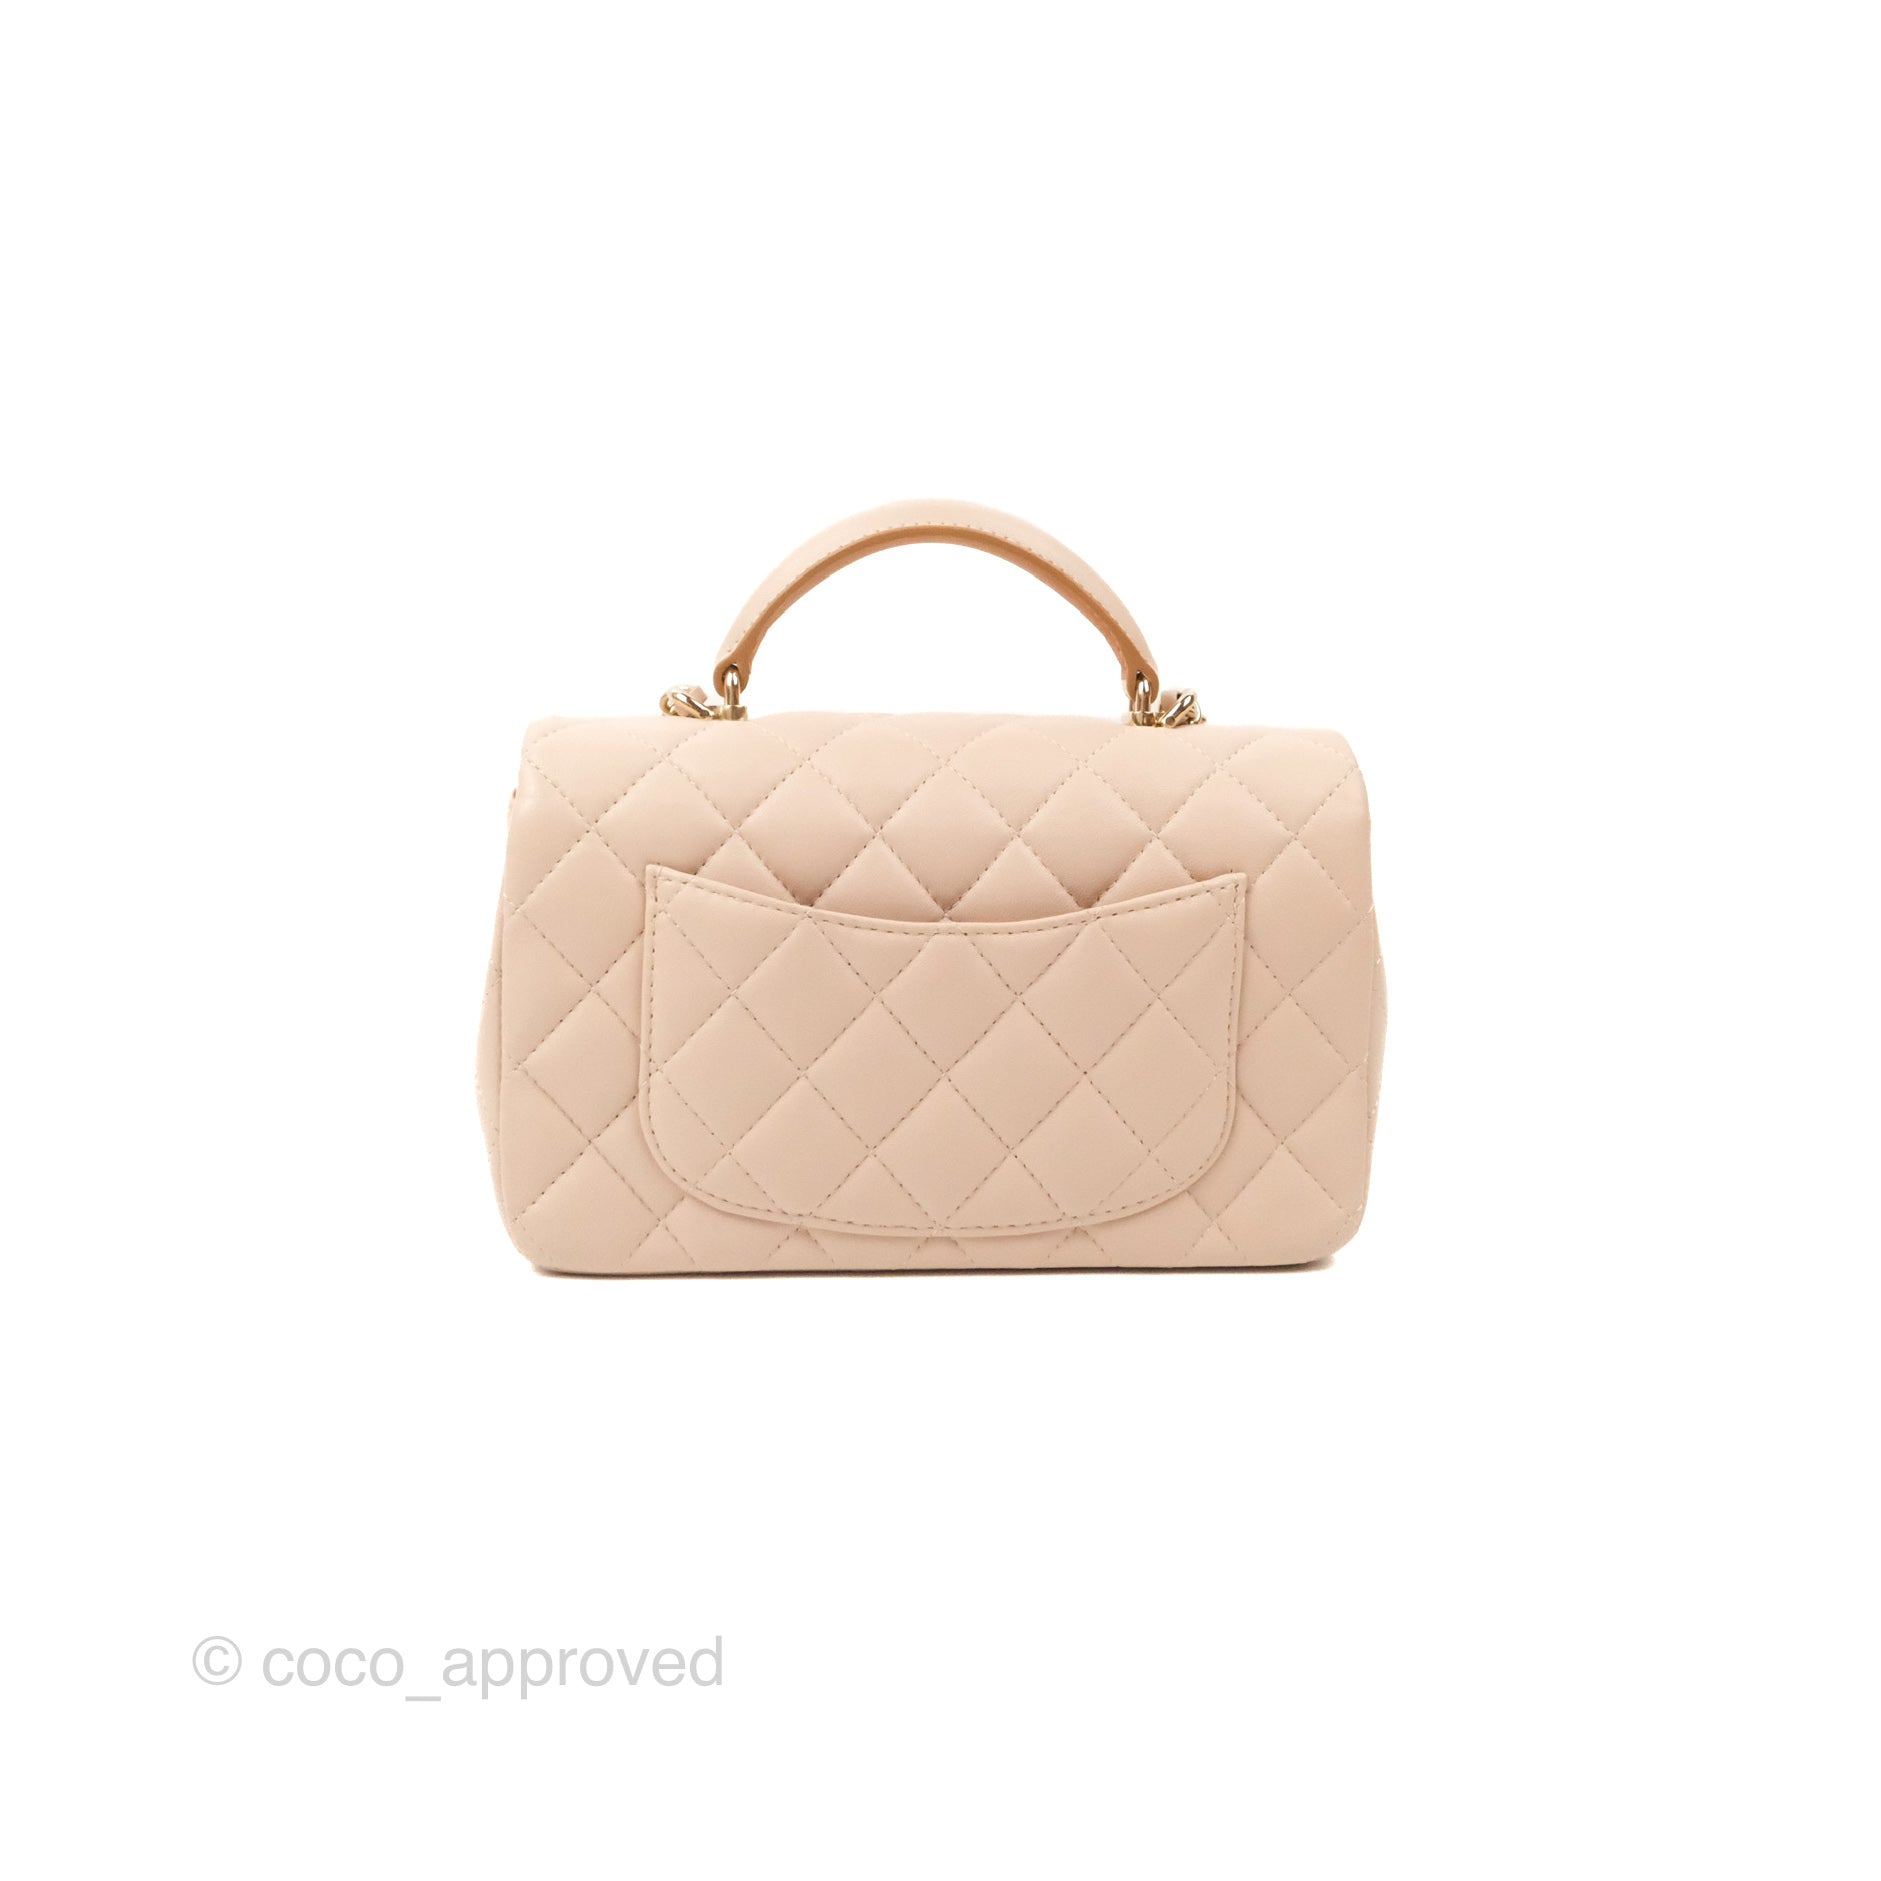 Sold at Auction: A MINI FUR BAG BY CHANEL